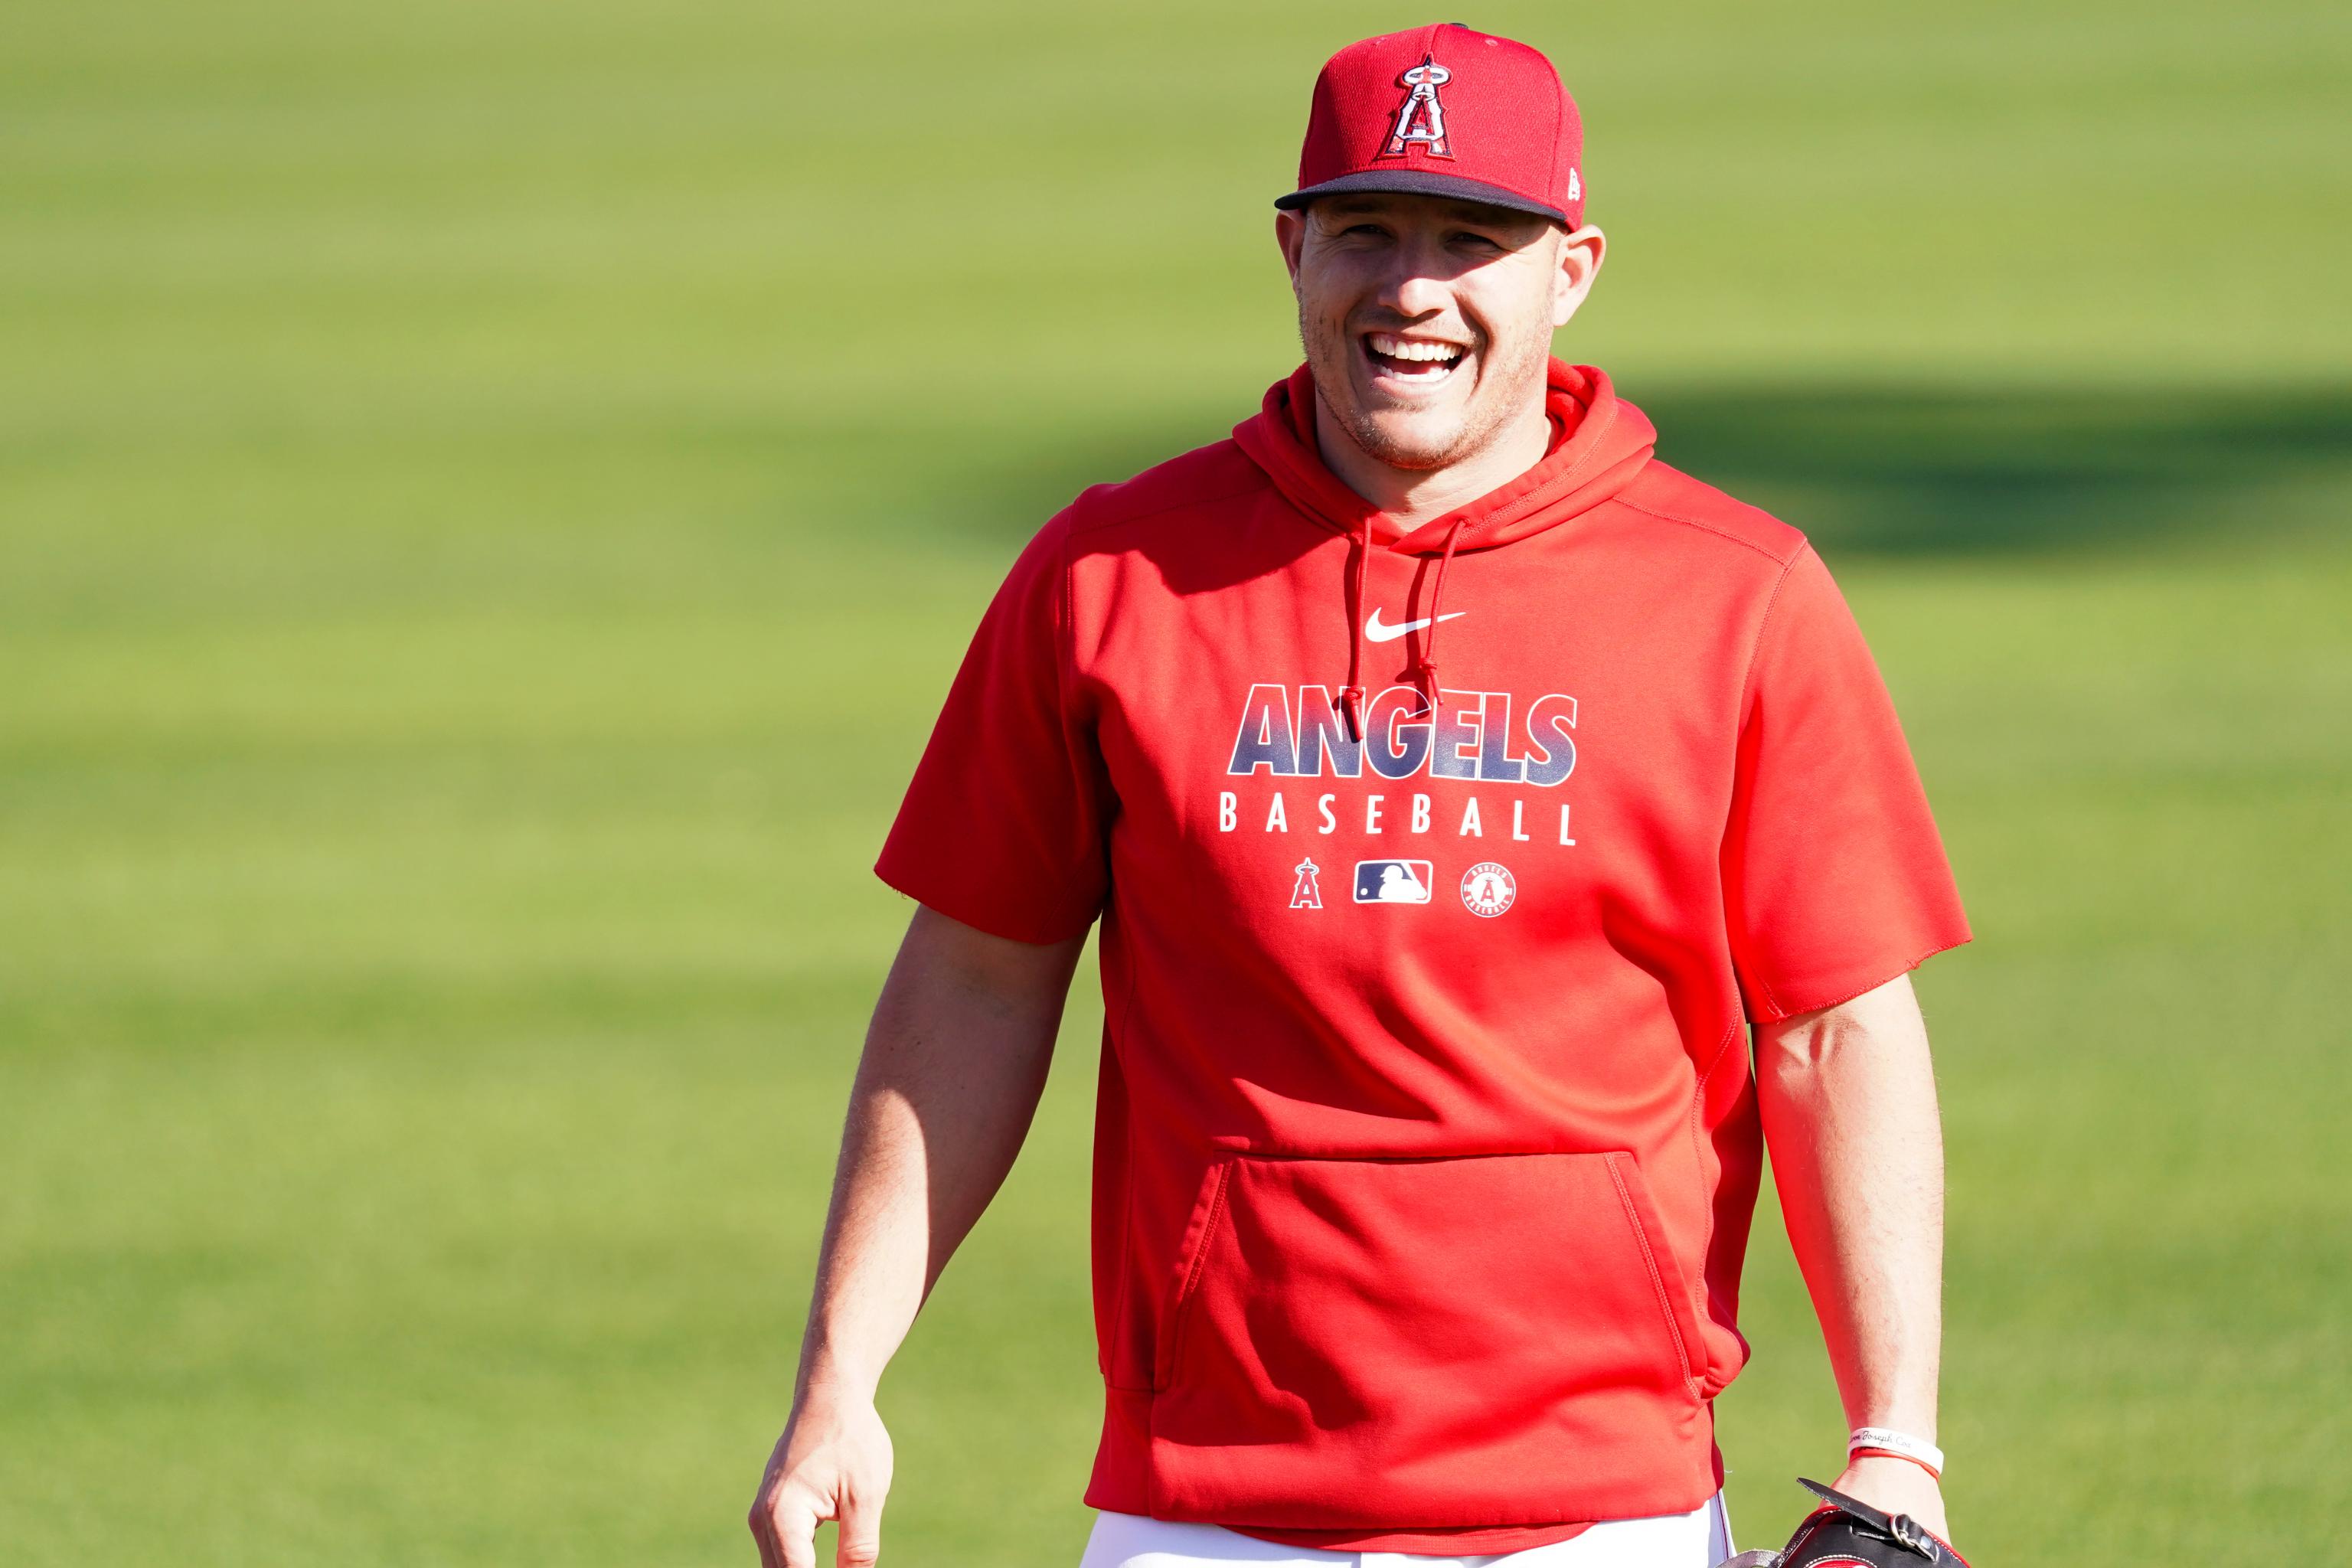 MLB star Mike Trout and wife Jessica welcome 1st child, a son